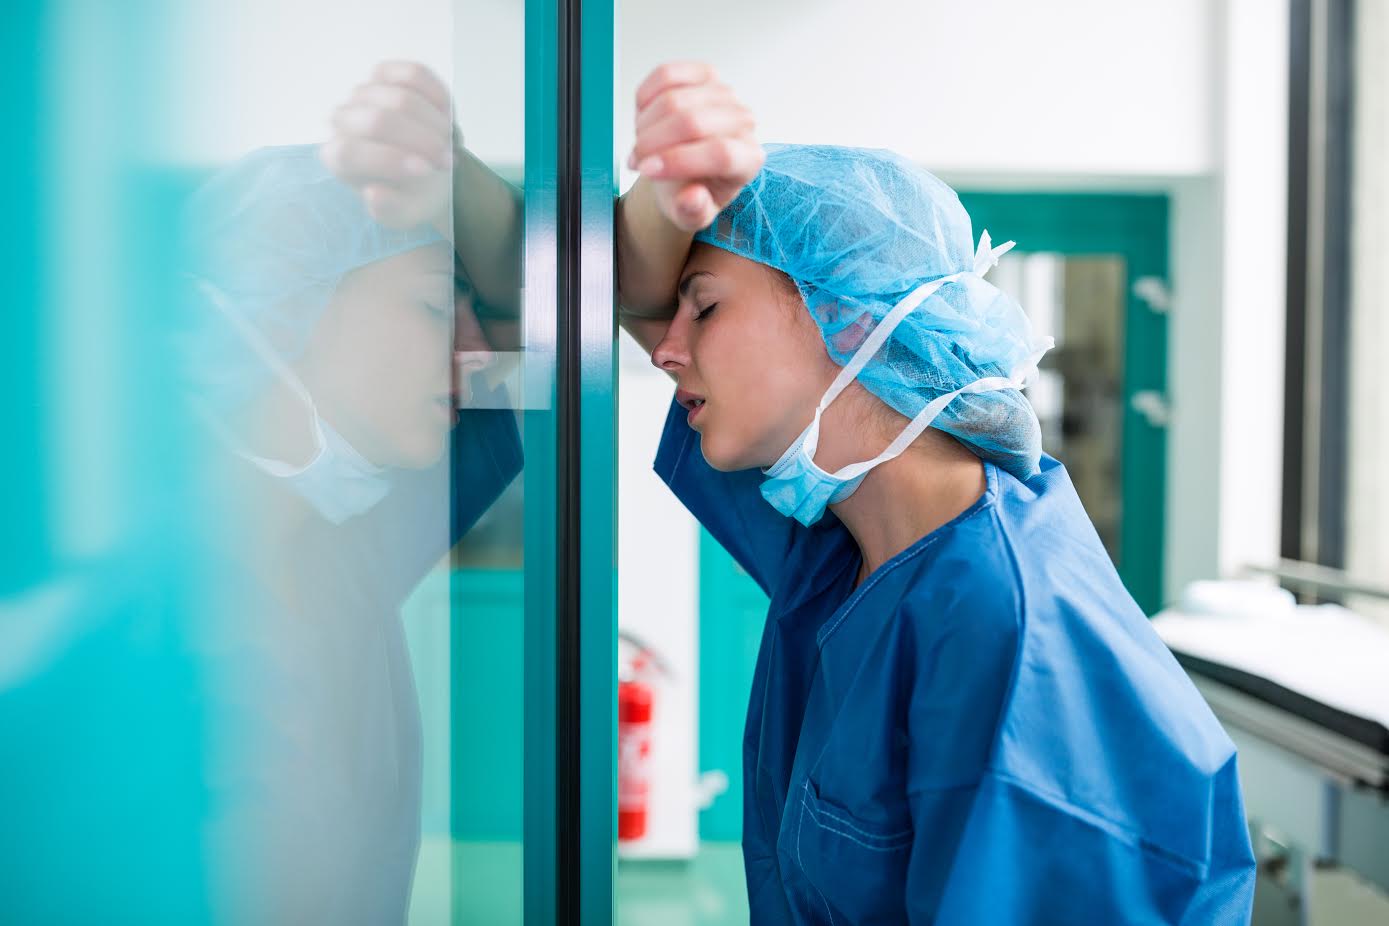 Sad surgeon leaning against the glass door in hospital